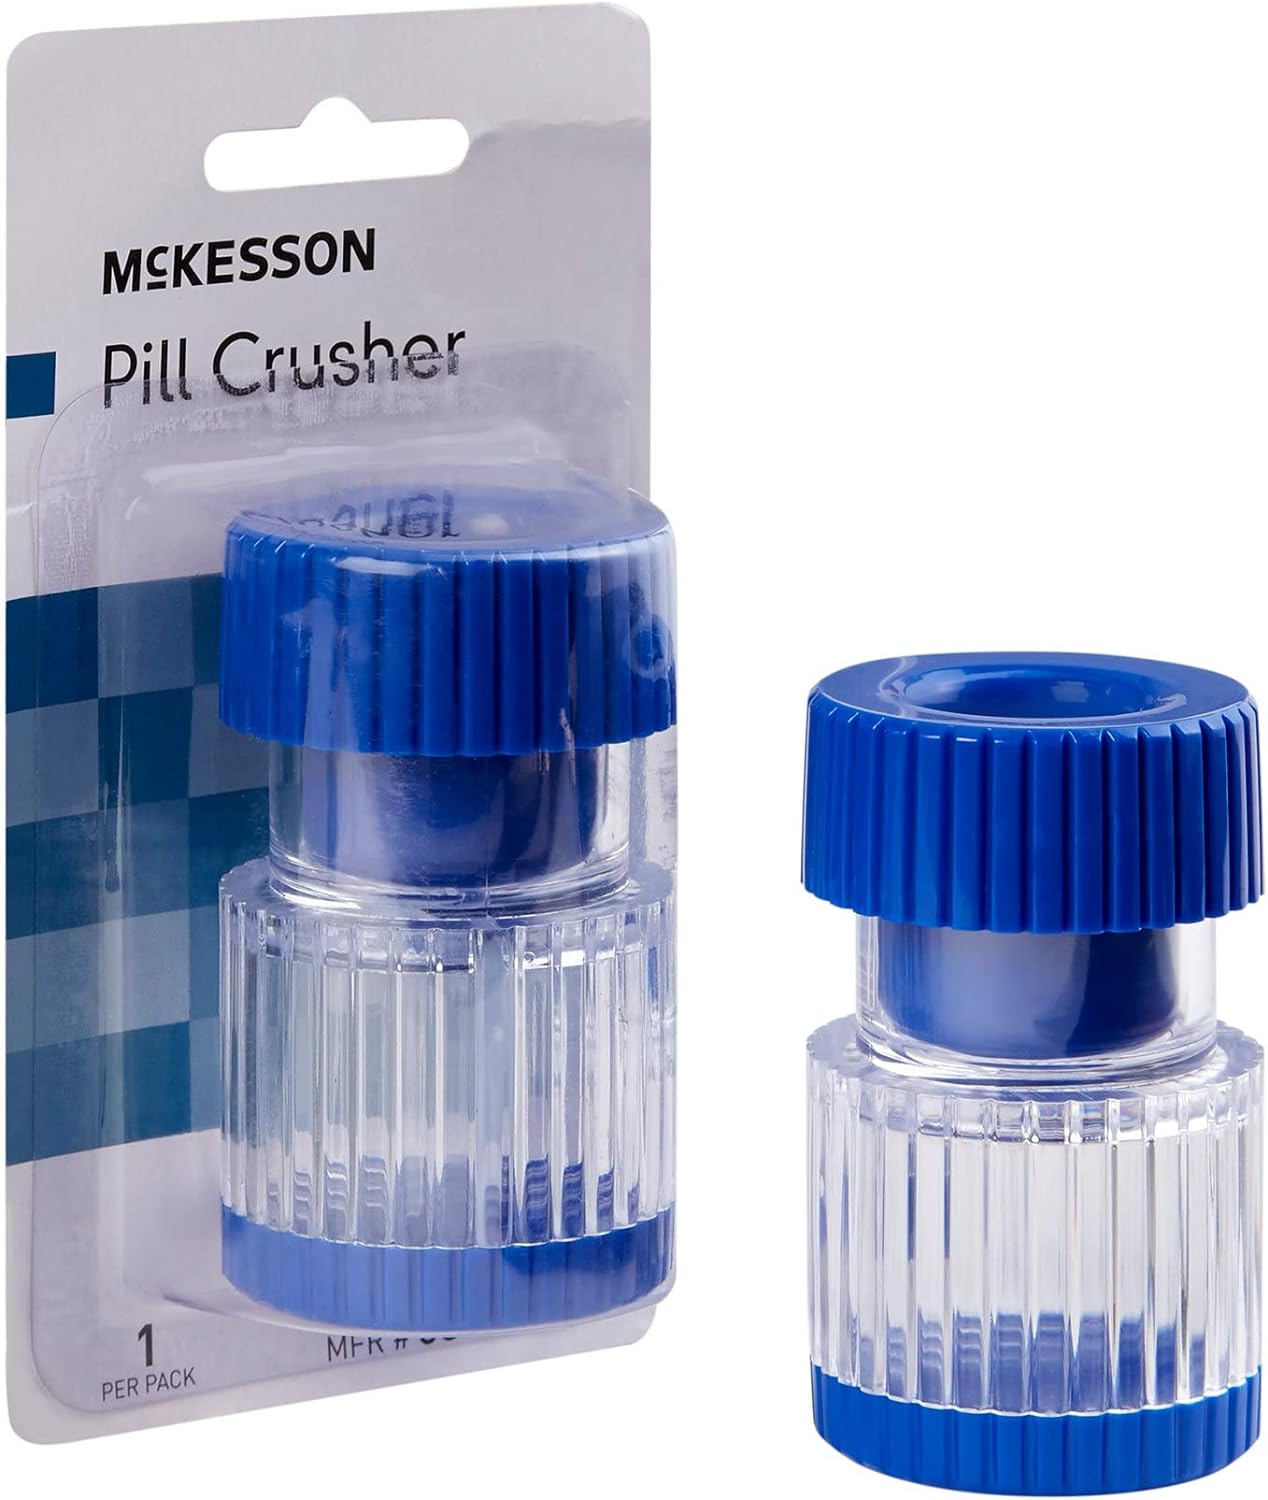 McKesson Hand-Operated Plastic Pill Crusher with Storage Compartment, Clear Body, 1 Count